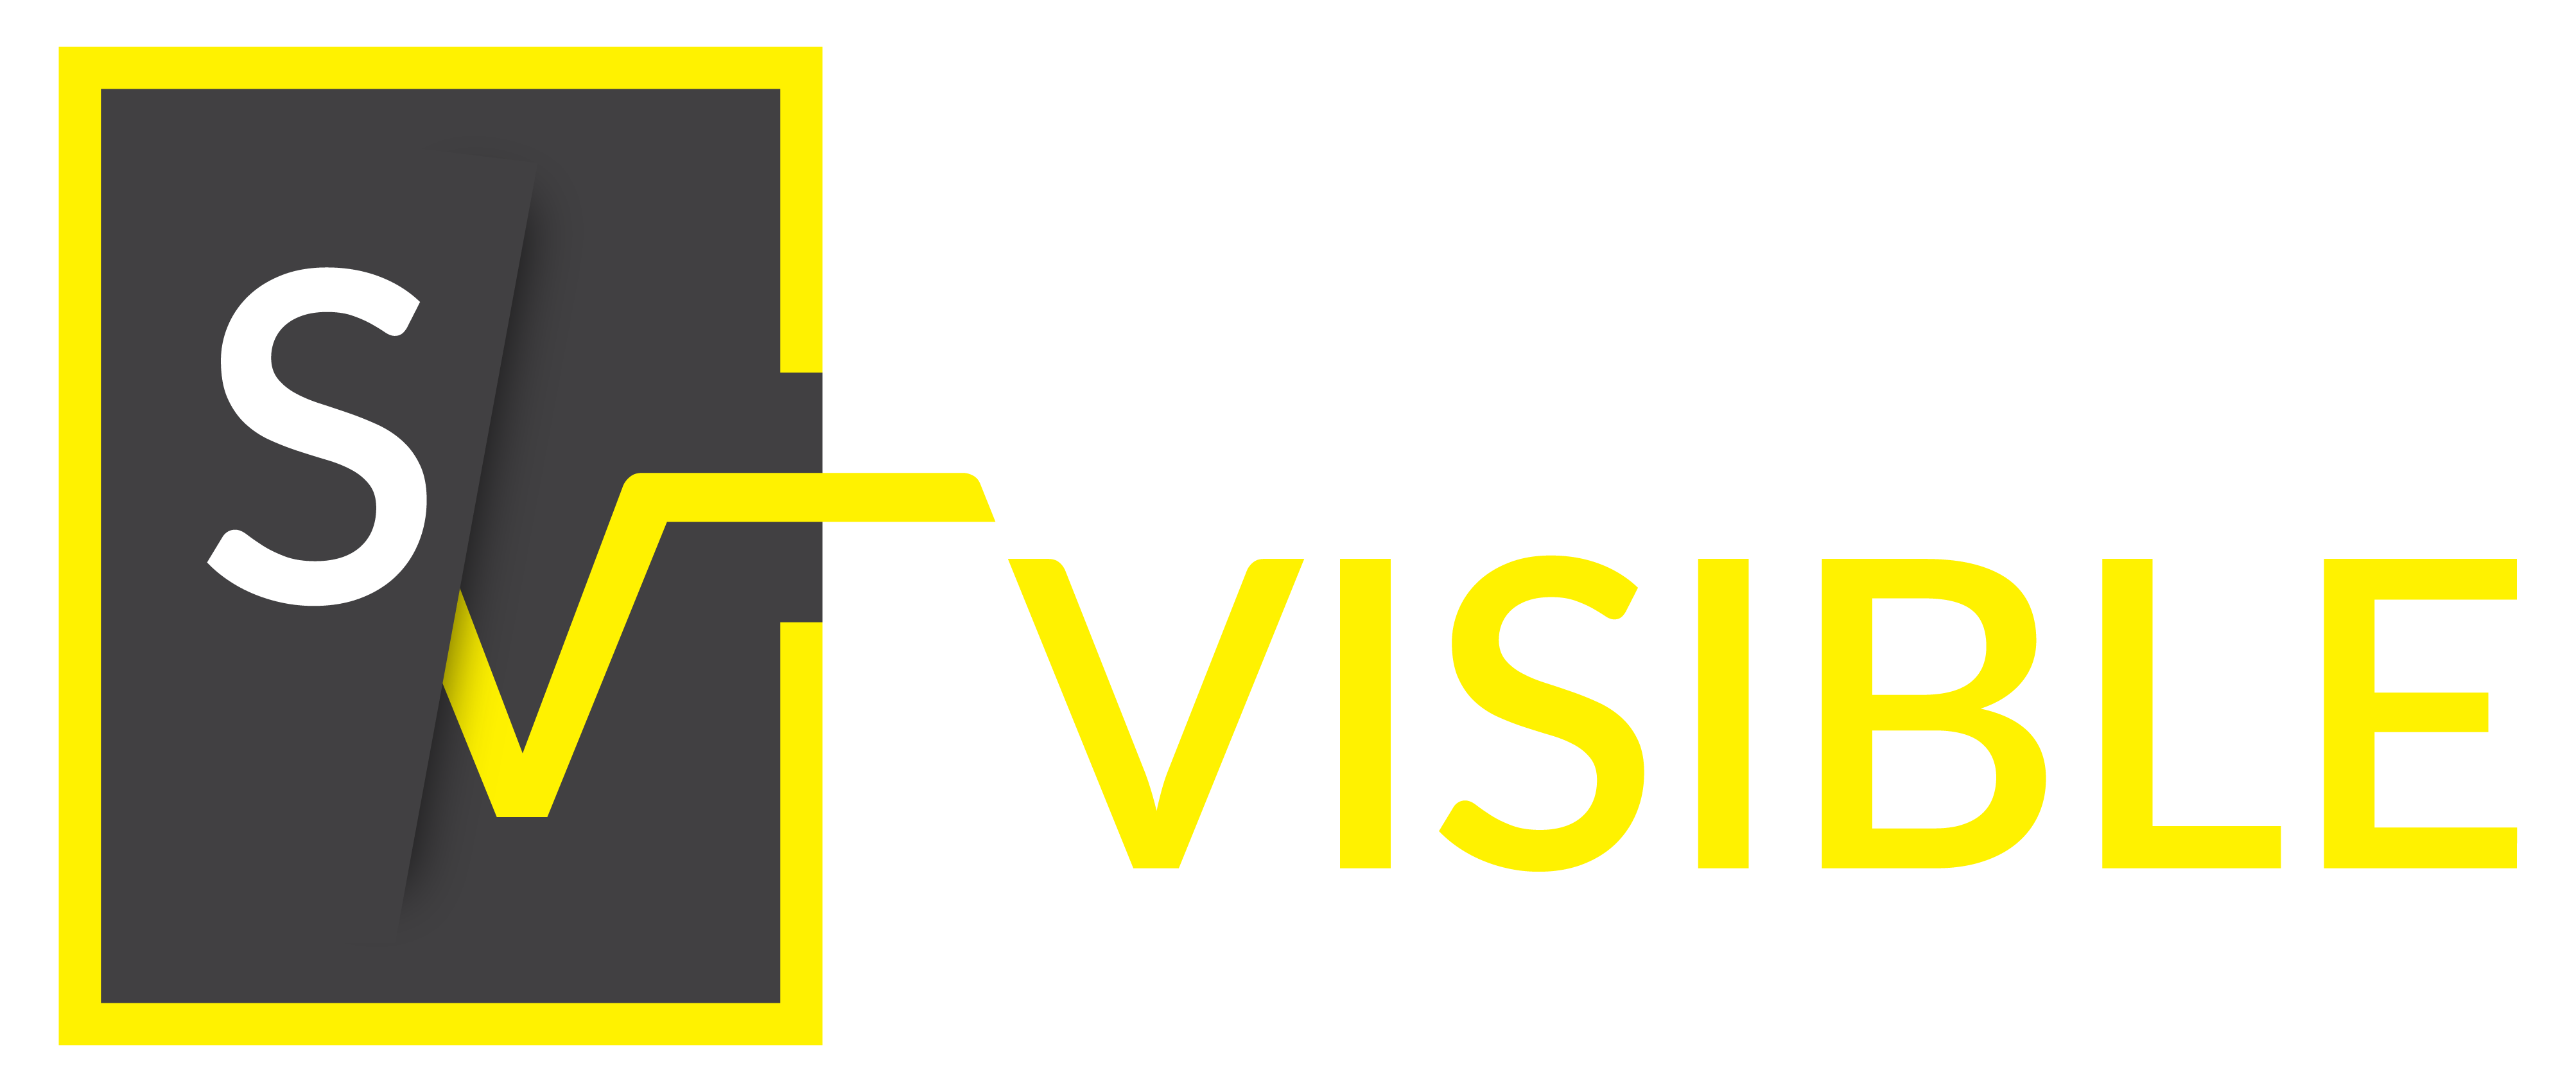 Servisible